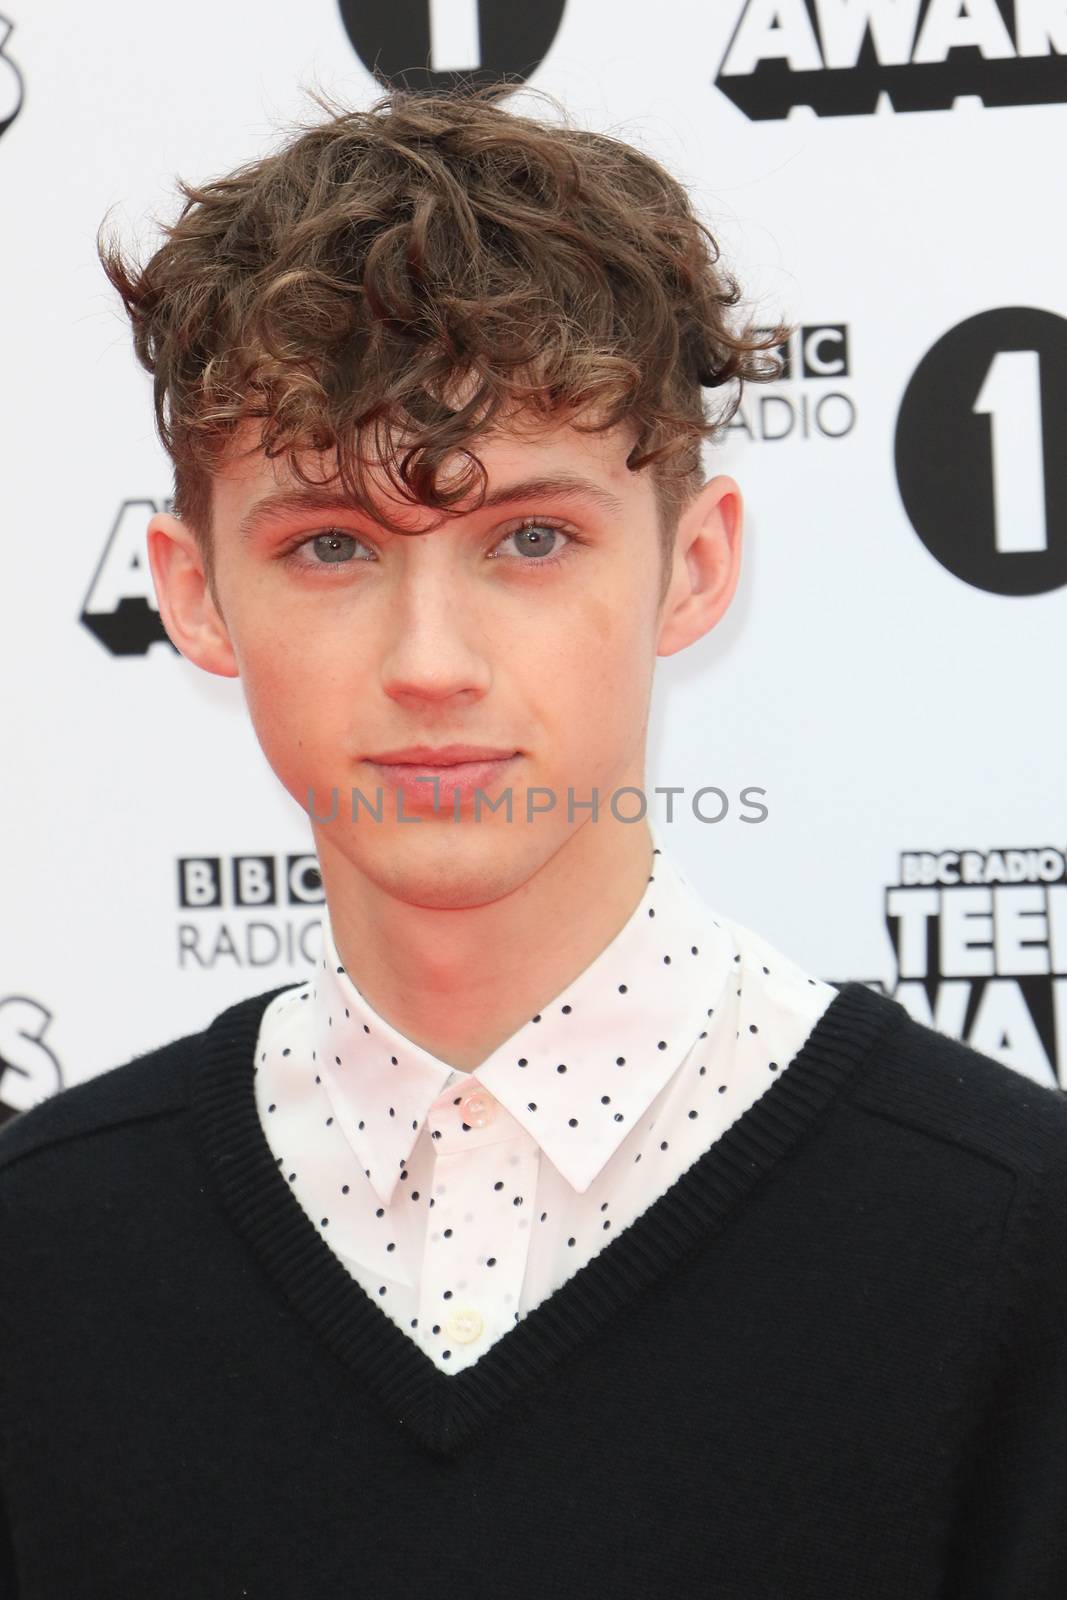 UNITED KINGDOM, London: Troye Sivan attends BBC Radio 1's Teen Awards at Wembley Arena in London on November 8, 2015. 